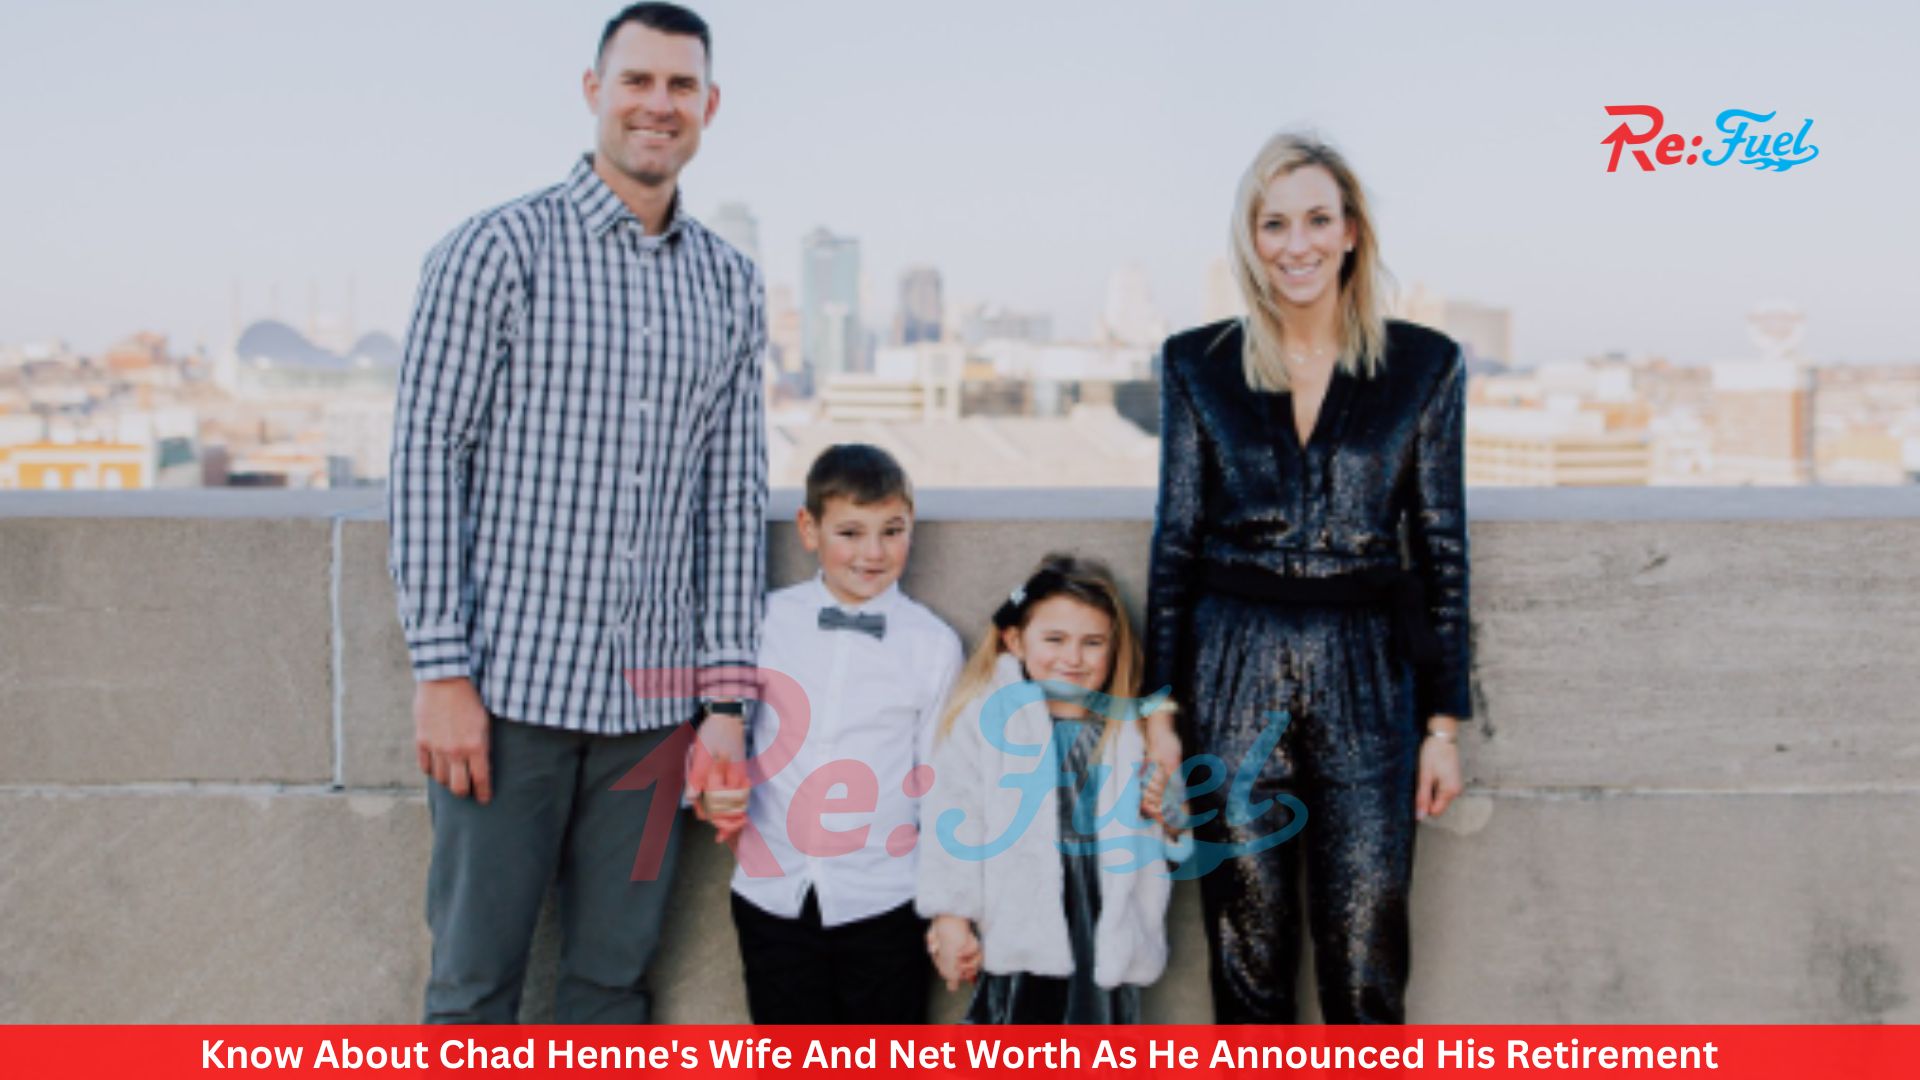 Know About Chad Henne's Wife And Net Worth As He Announced His Retirement